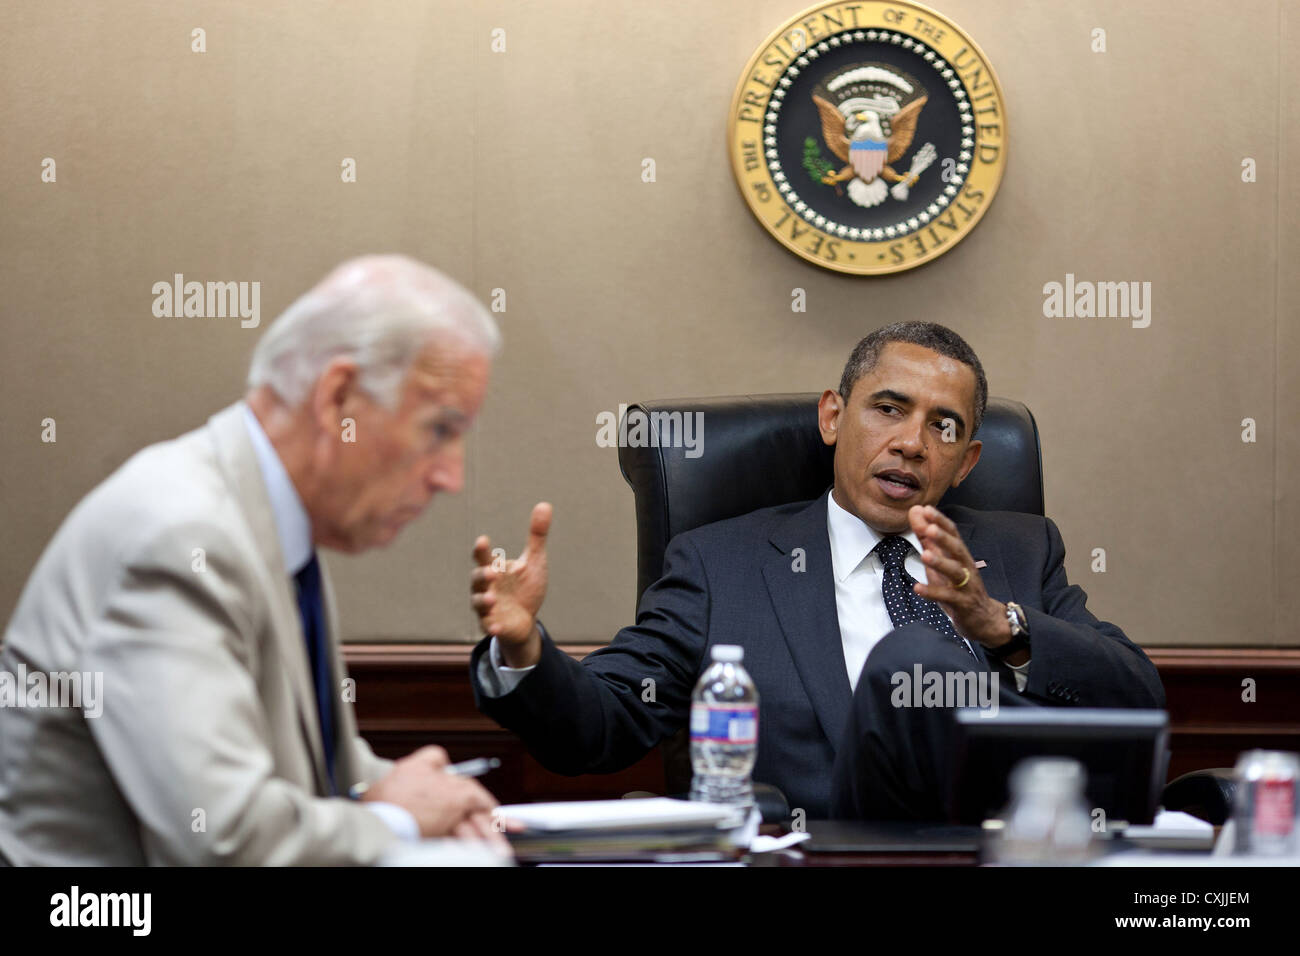 US President Barack Obama and Vice President Joe Biden meet with National Security Staff June 20, 2011 in the Situation Room of the White House. Stock Photo